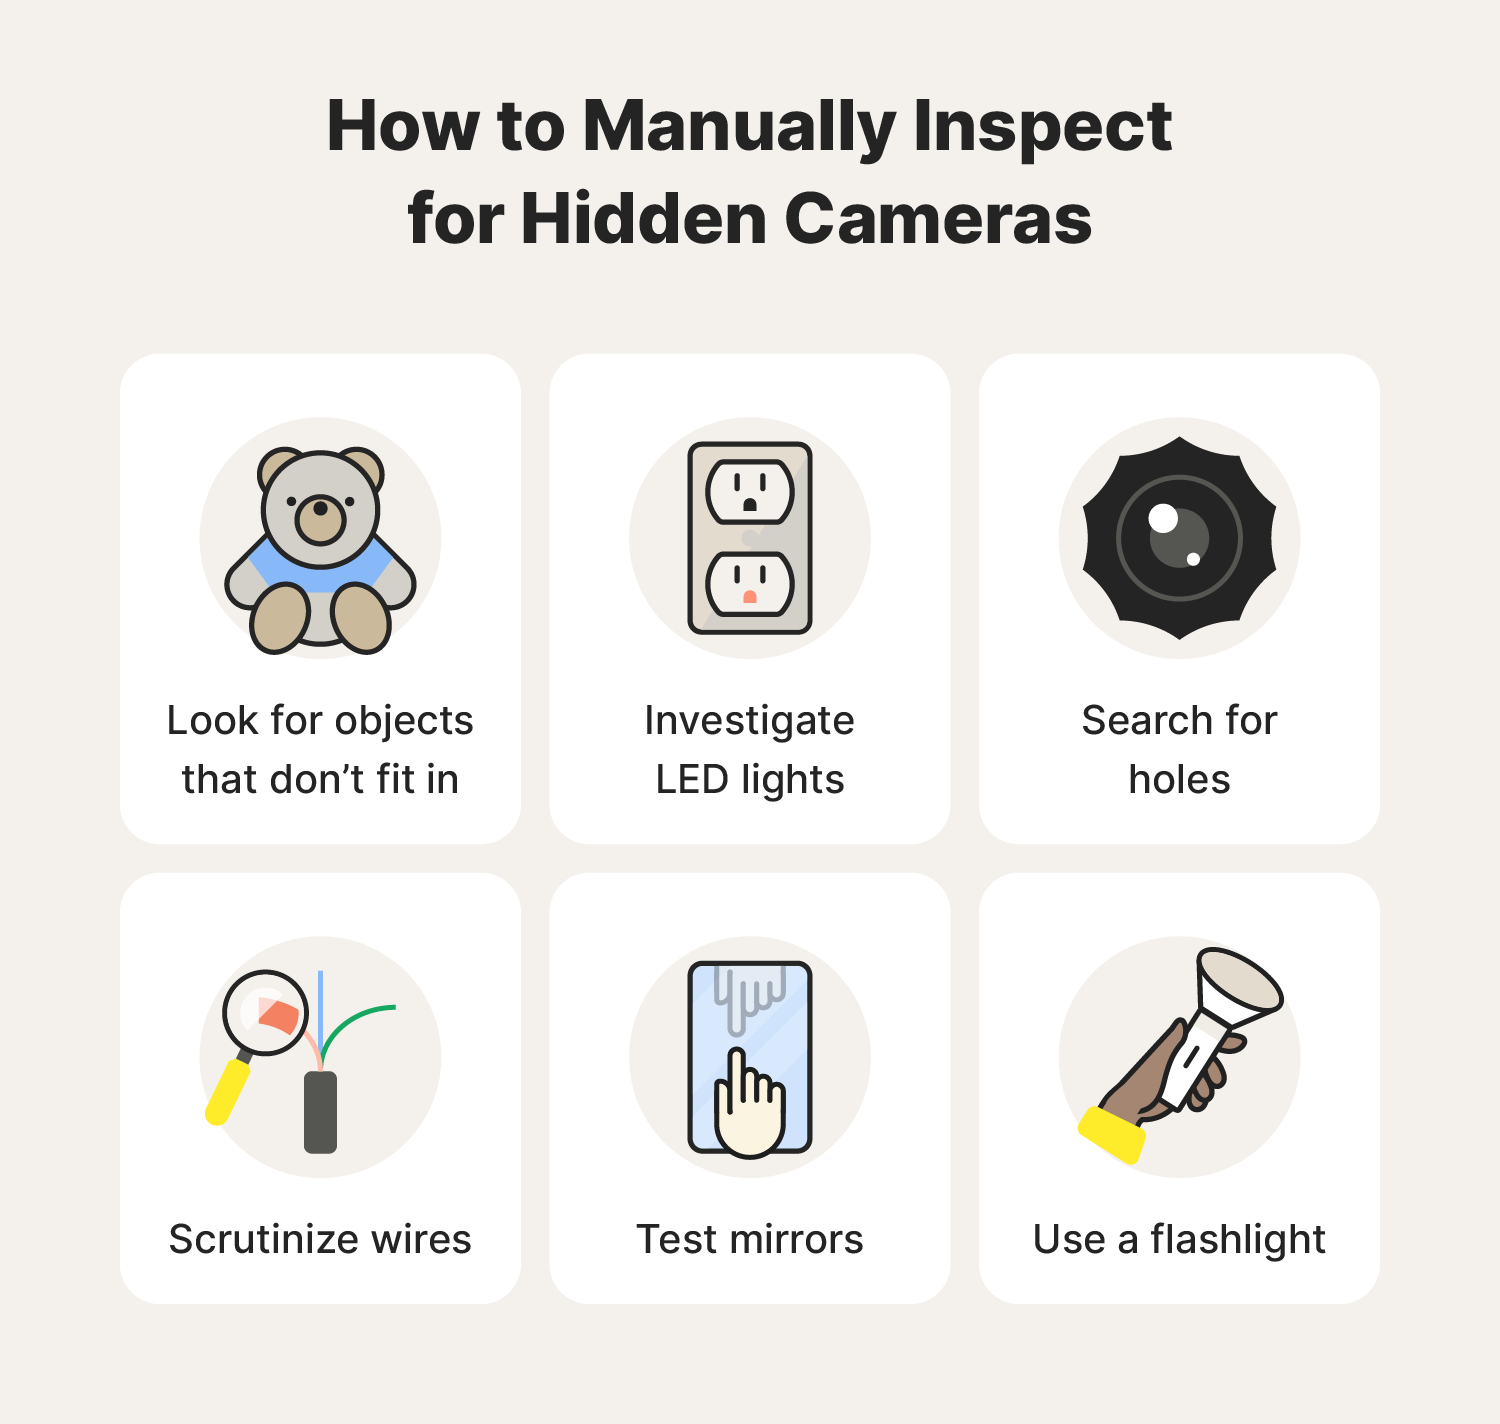 An infographic showing how to find hidden cameras with a manual inspection. 